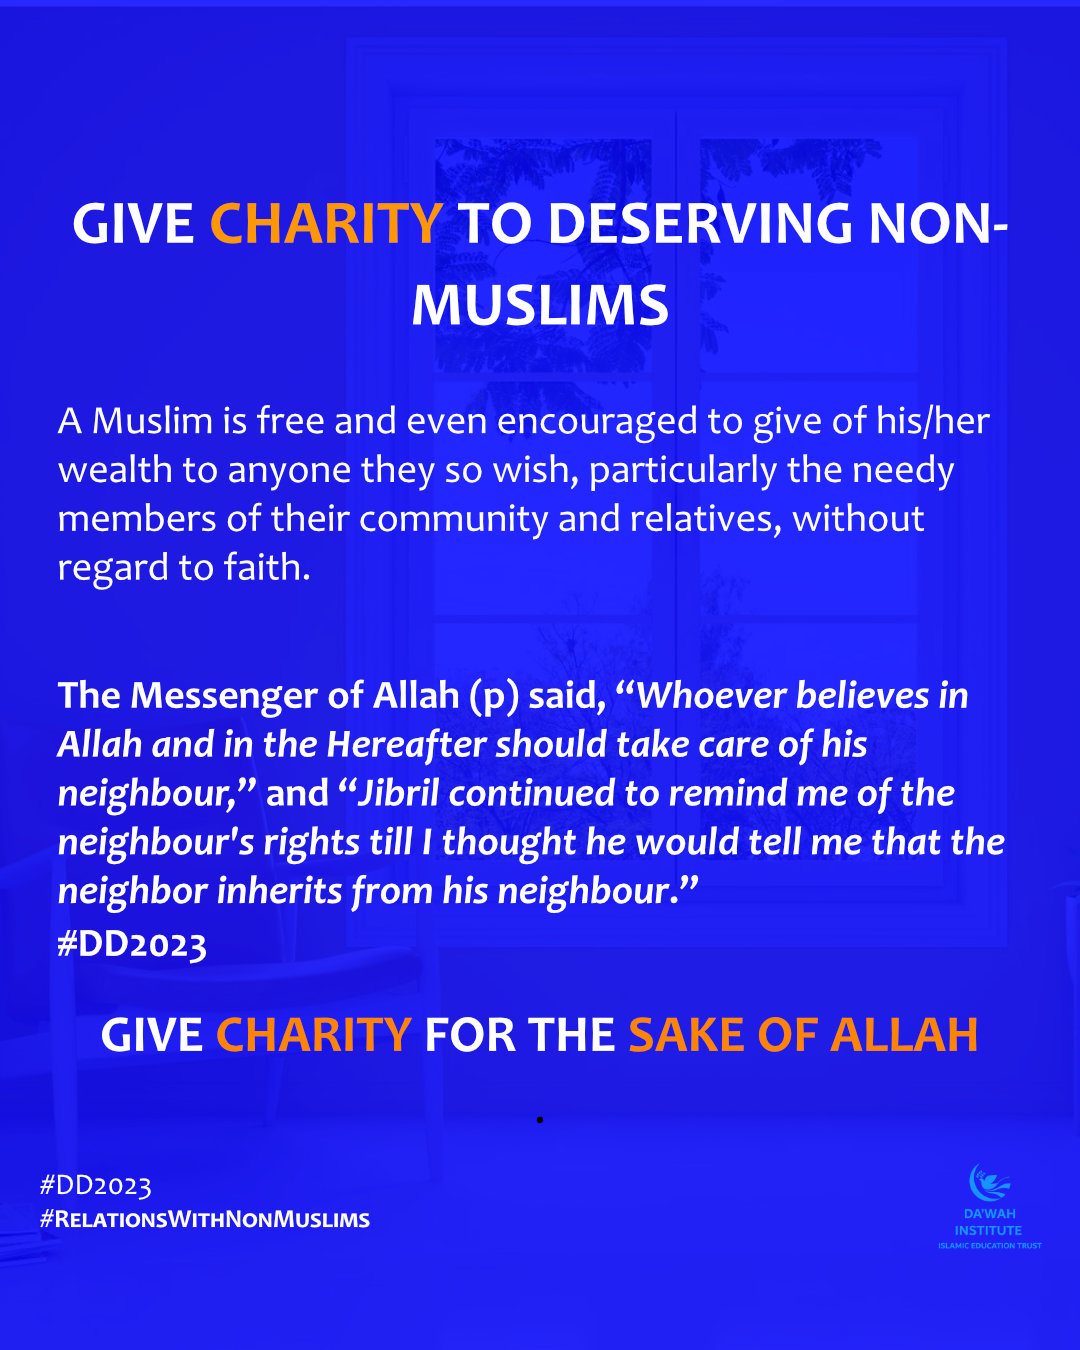 GIVE CHARITY TO DESERVING NON-MUSLIMS